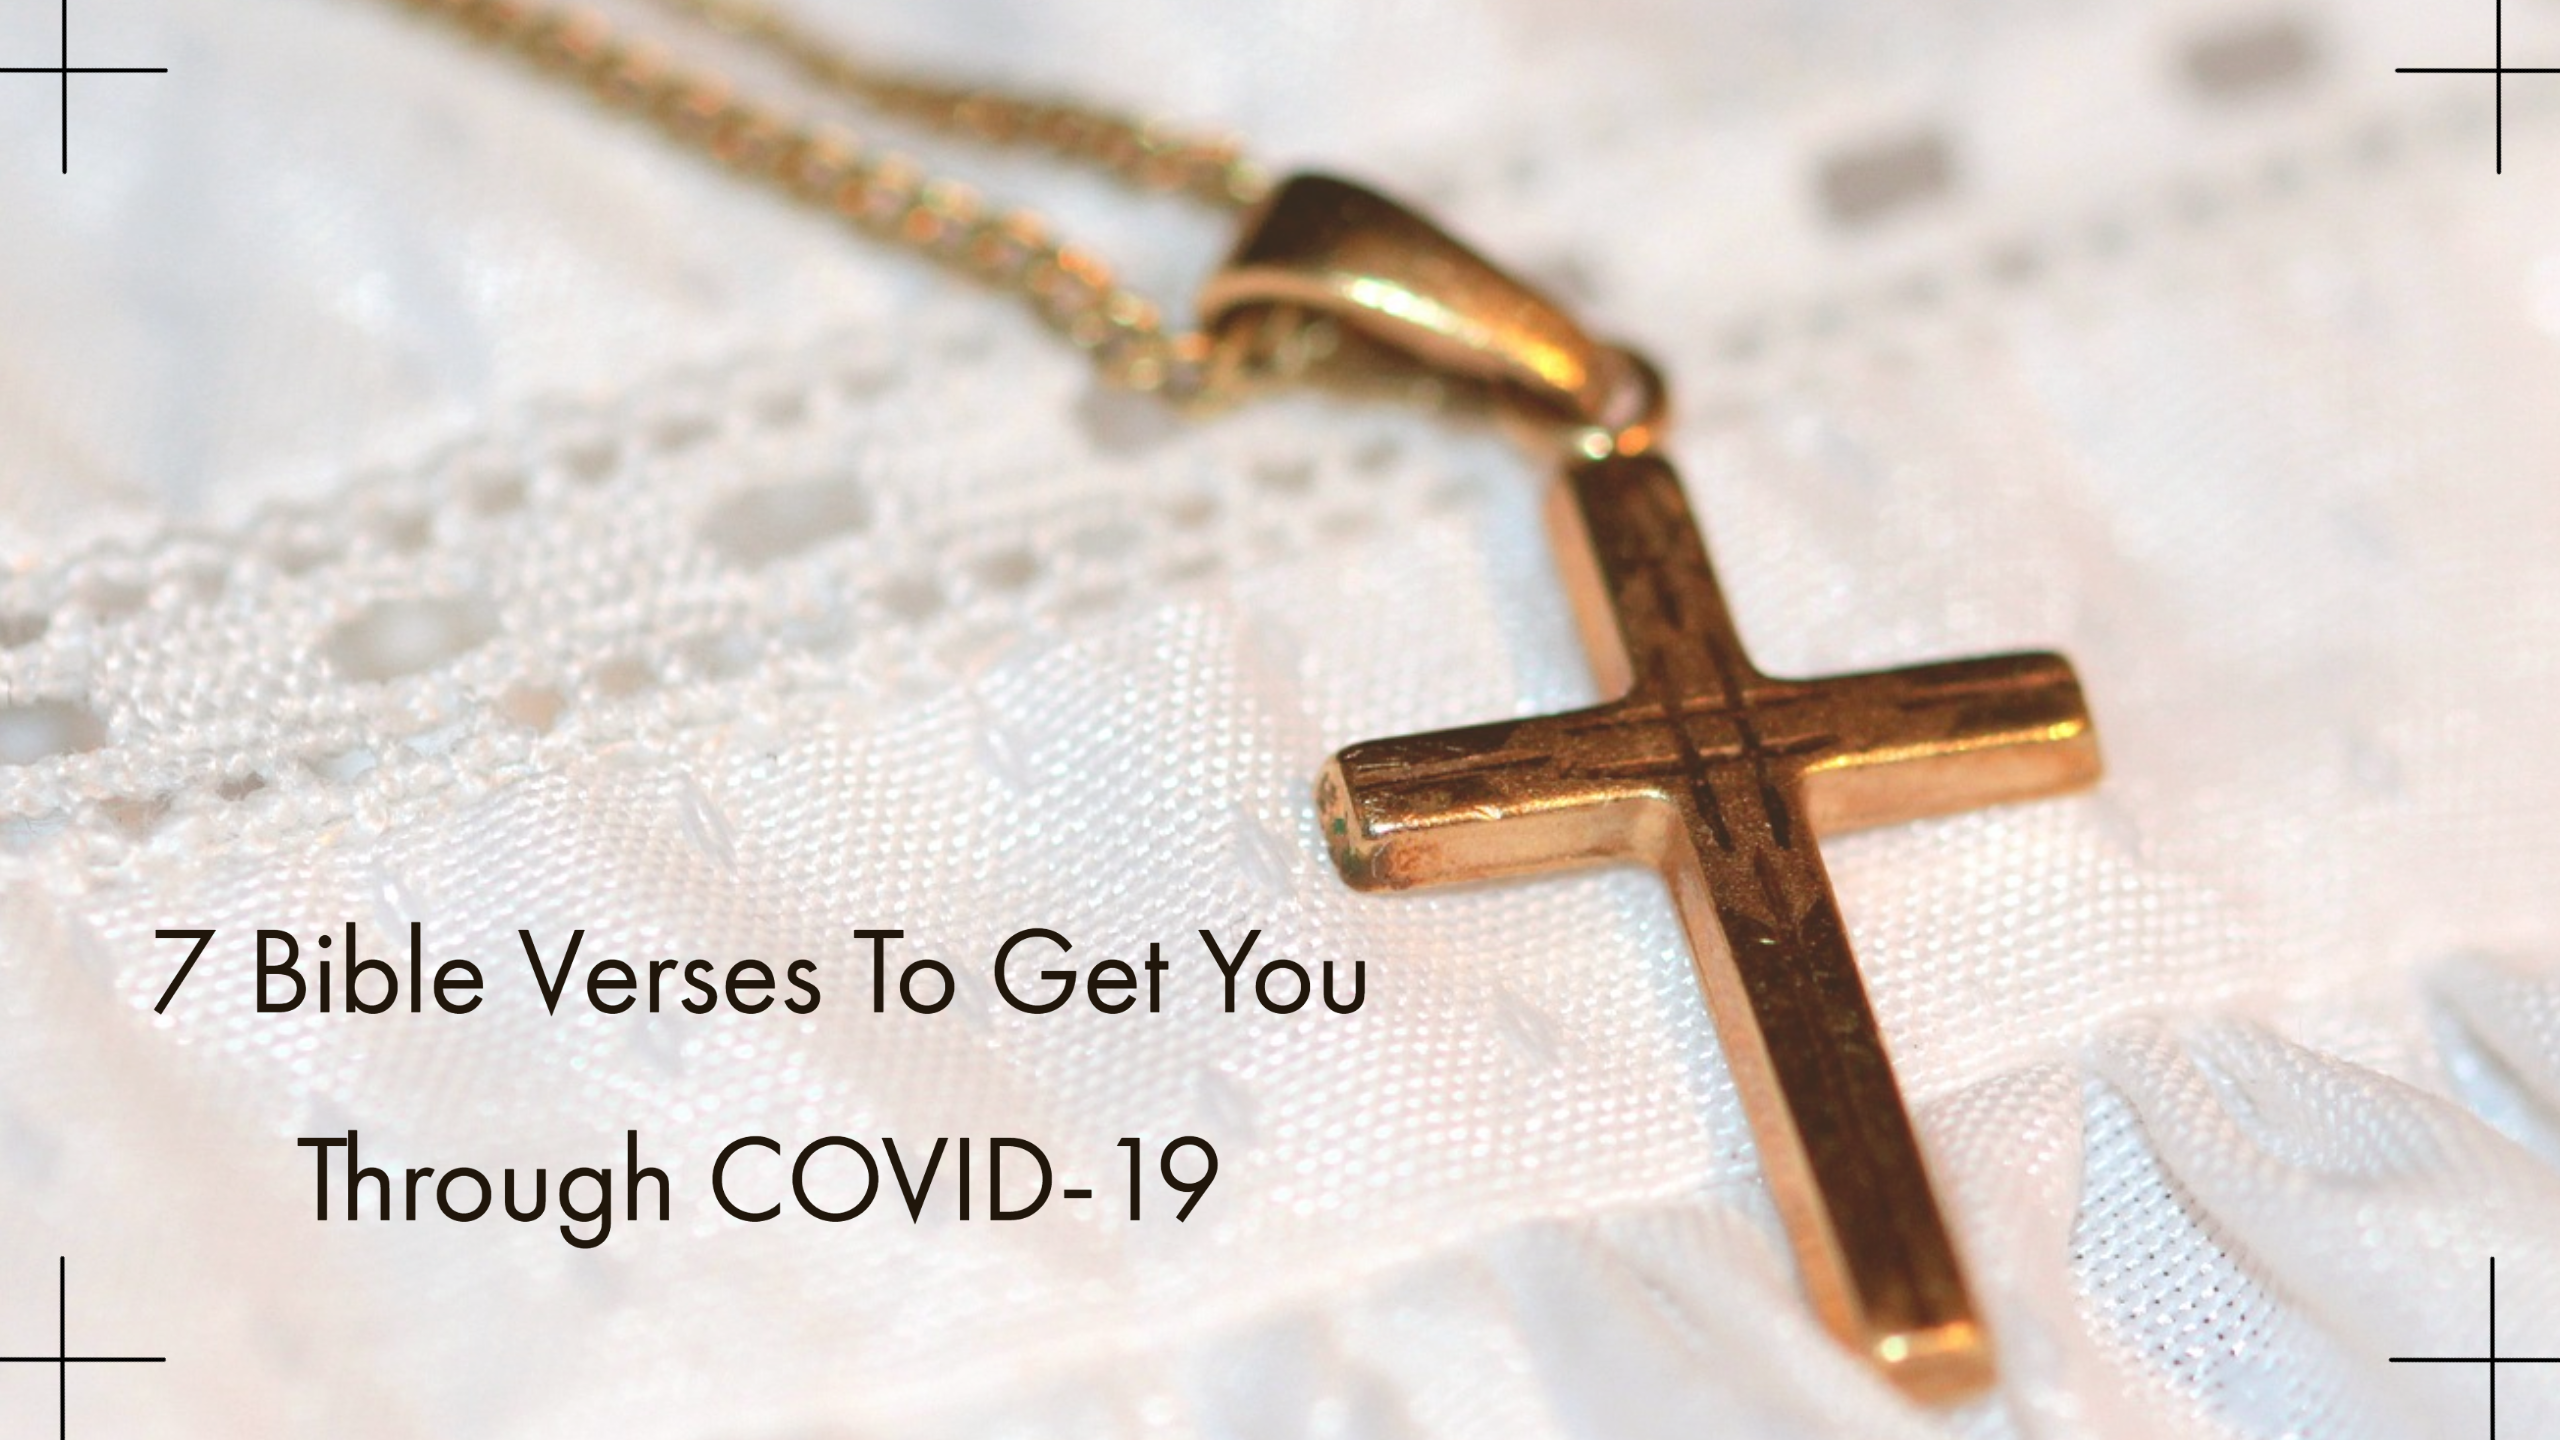 7 Bible Verses To Get You Through COVID-19